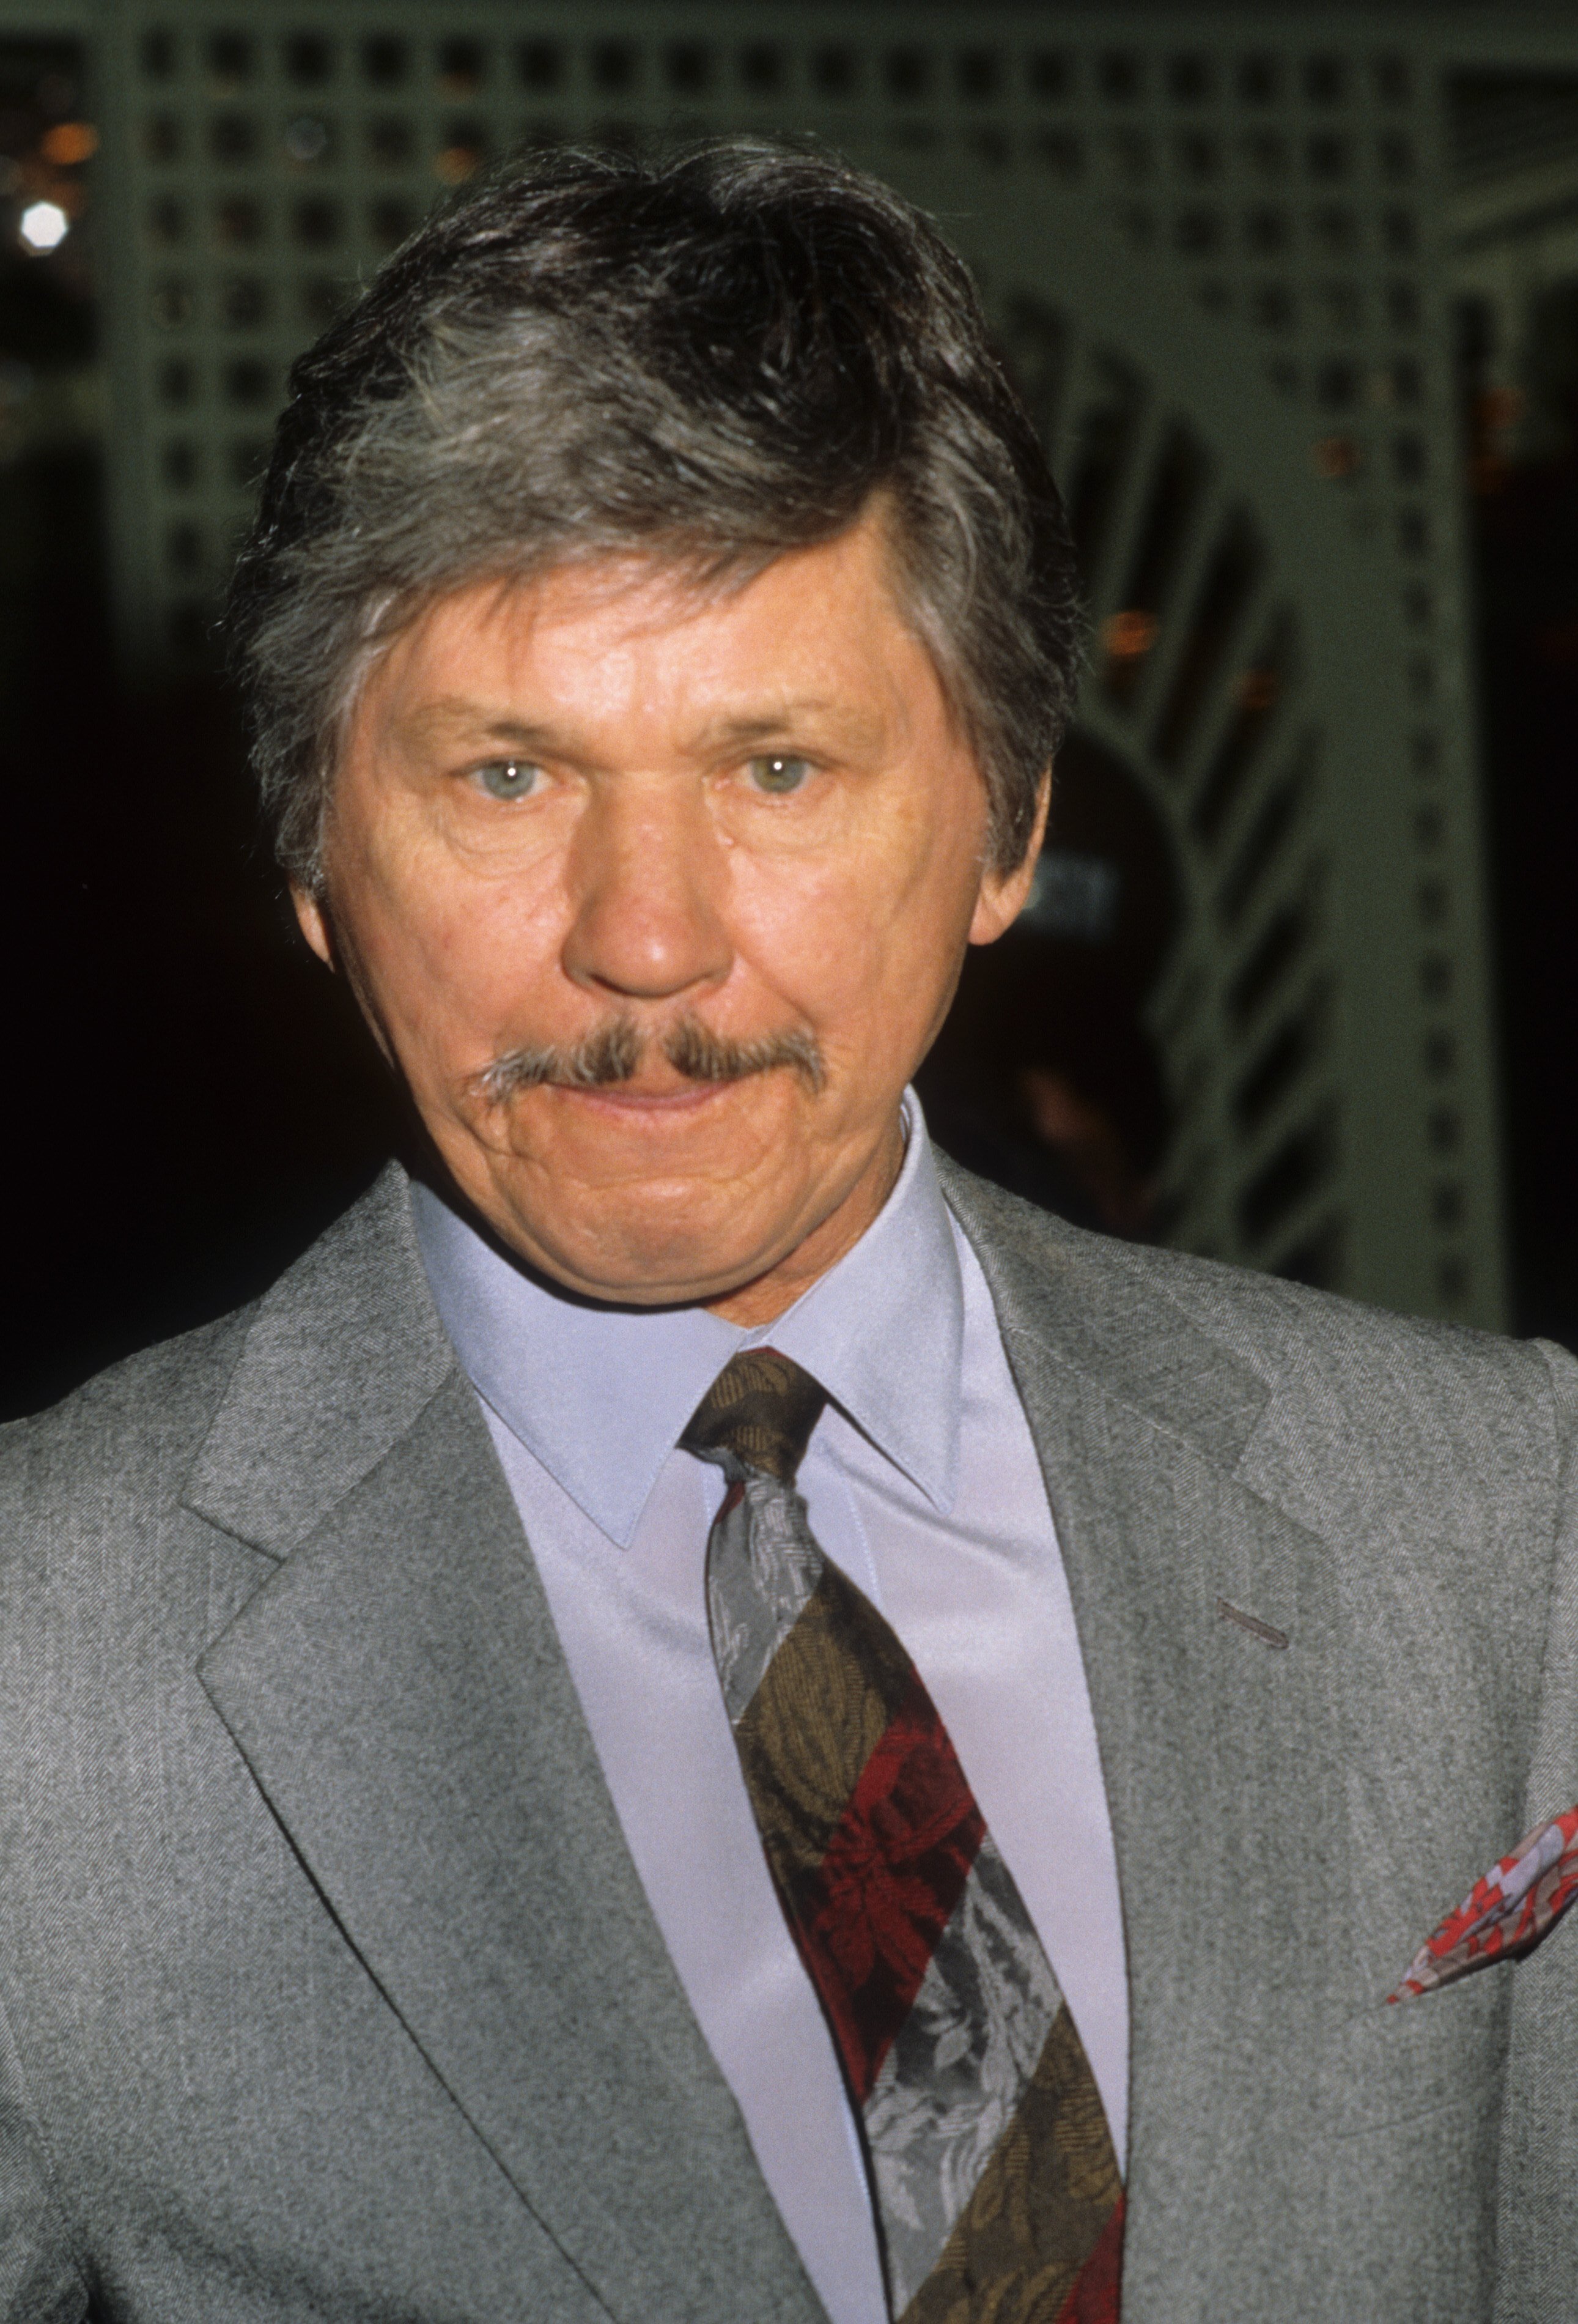 Actor Charles Bronson poses for a portrait in circa 1985 in Los Angeles, California. | Source: Getty Images